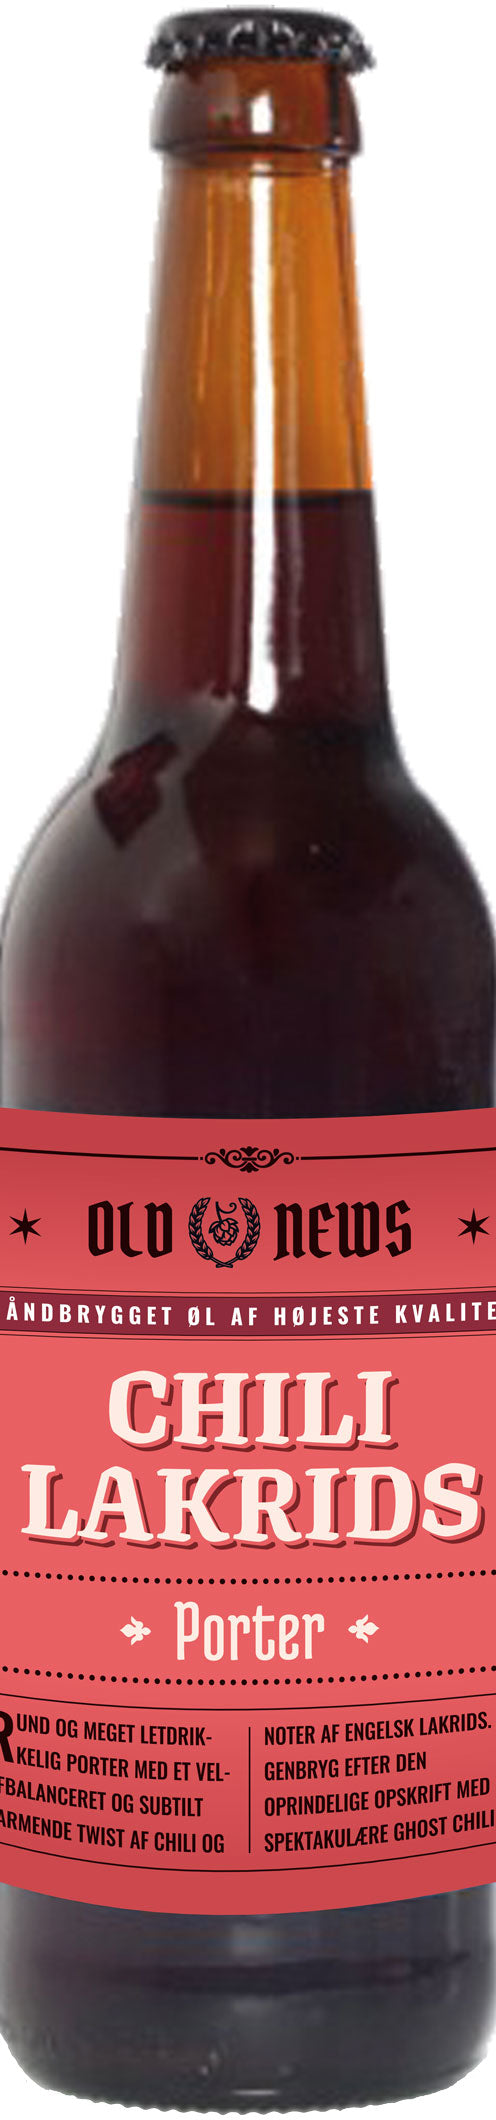 Old News Chili Lakrids 6,0% 50cl